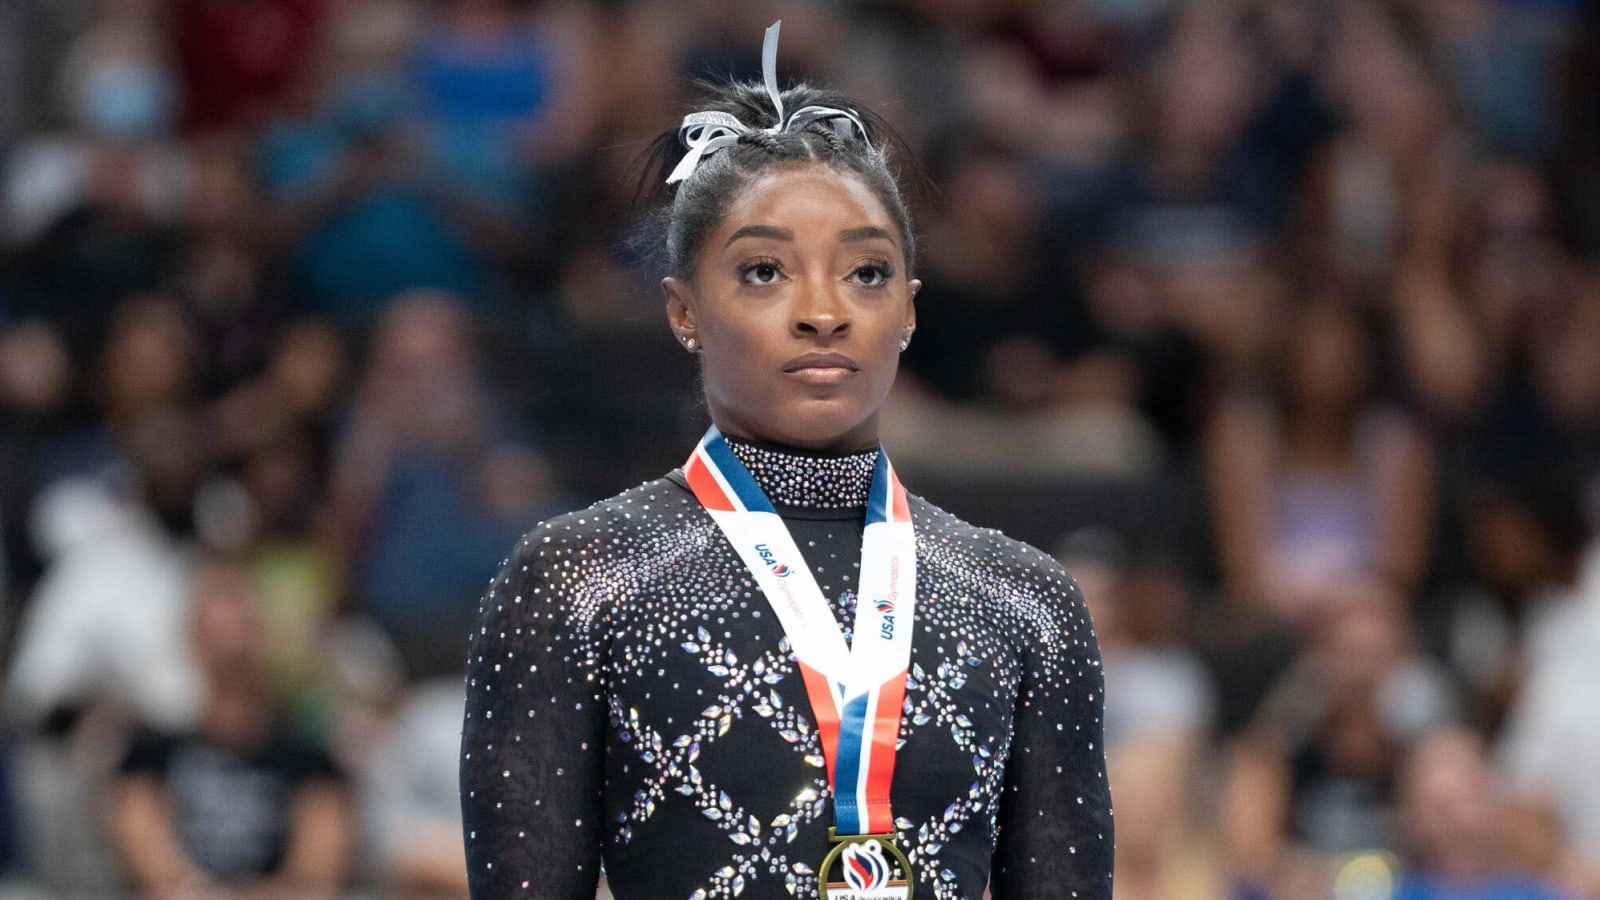 Amidst setbacks, 4x Olympic gold medalist Simone Biles gives update on massive Texas home construction